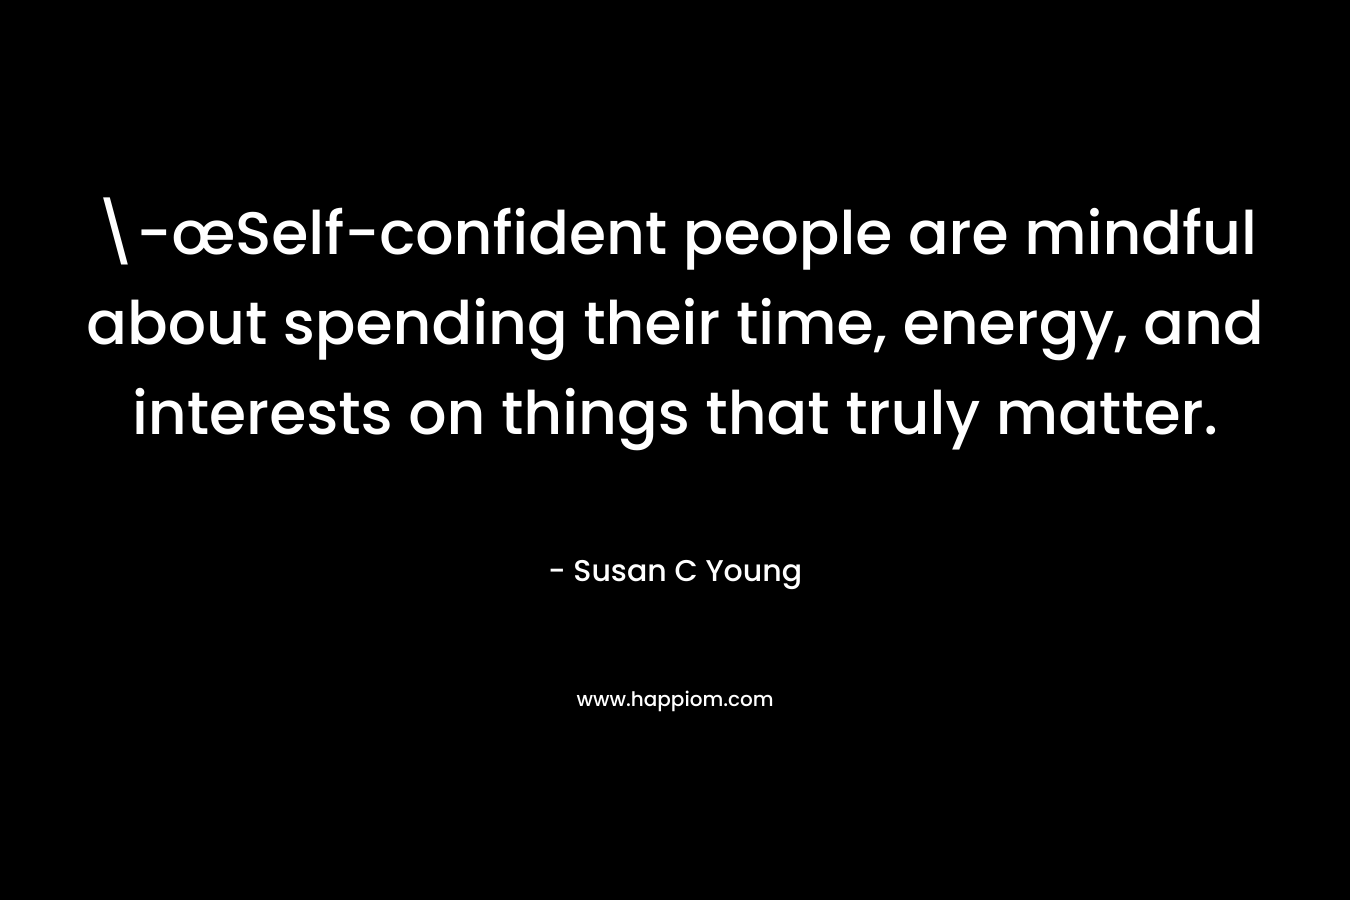 -œSelf-confident people are mindful about spending their time, energy, and interests on things that truly matter. – Susan C Young